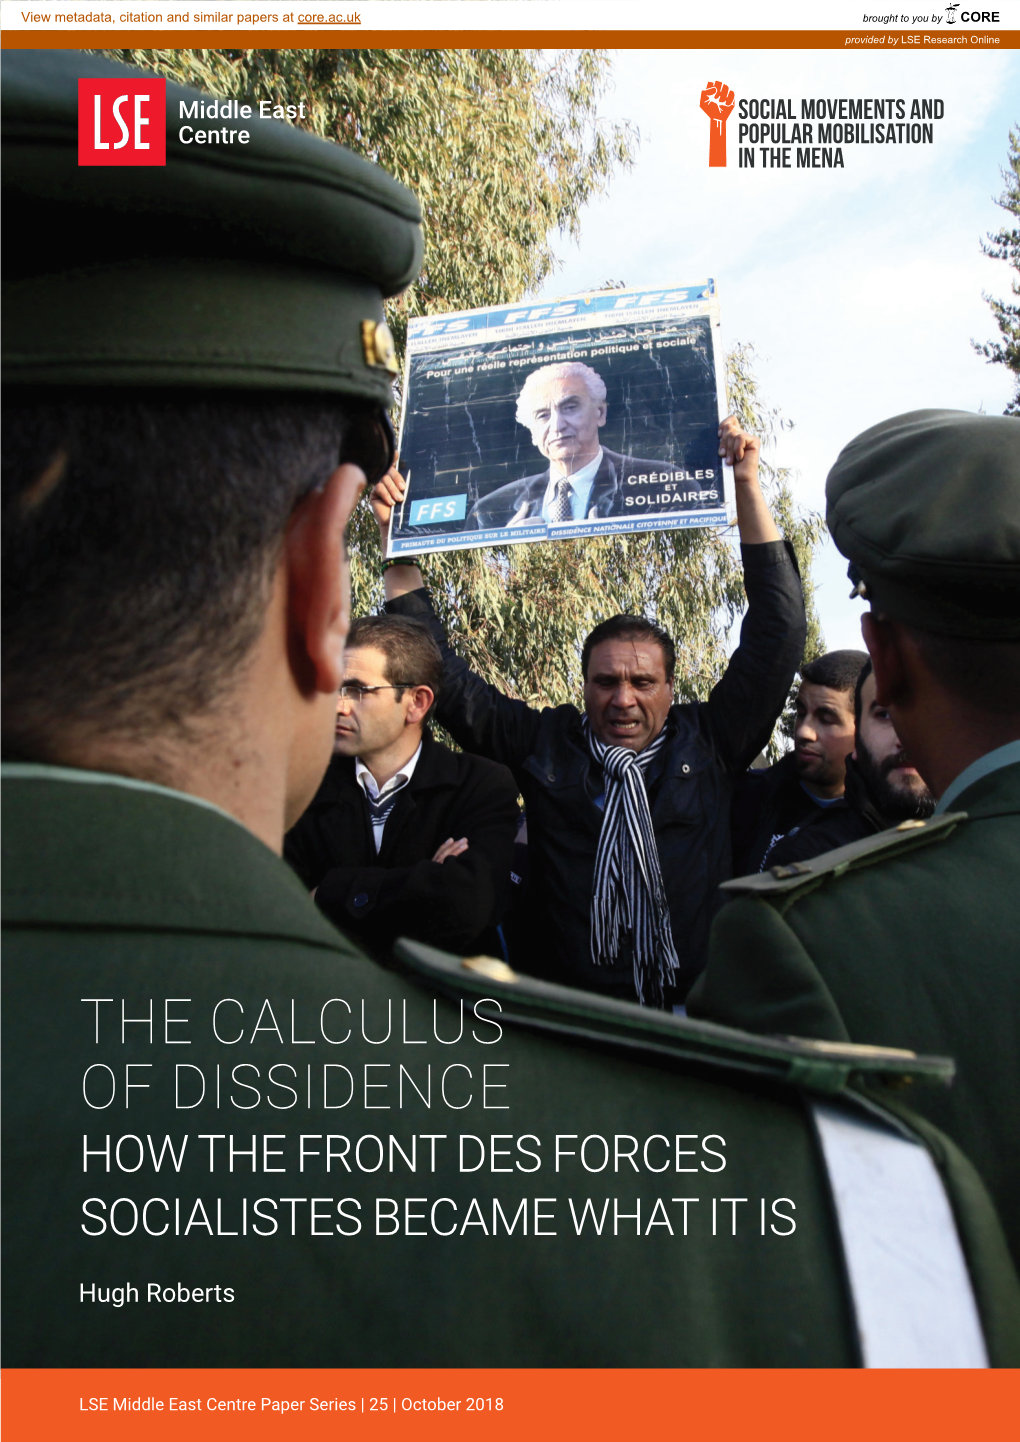 The Calculus of Dissidence How the Front Des Forces Socialistes Became What It Is